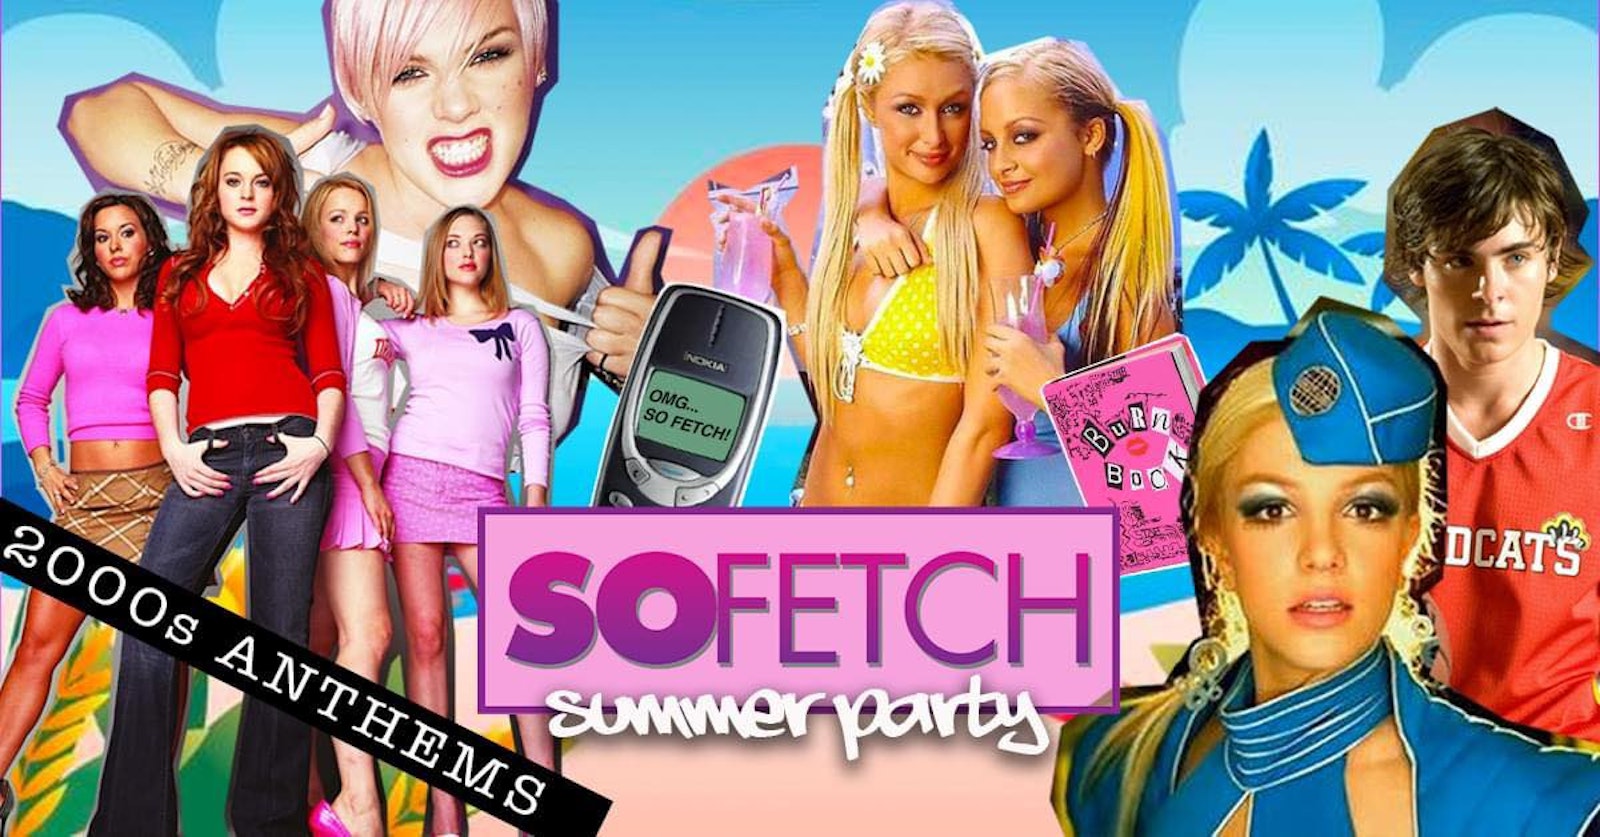 So Fetch – 2000s Rooftop Party (Cardiff)